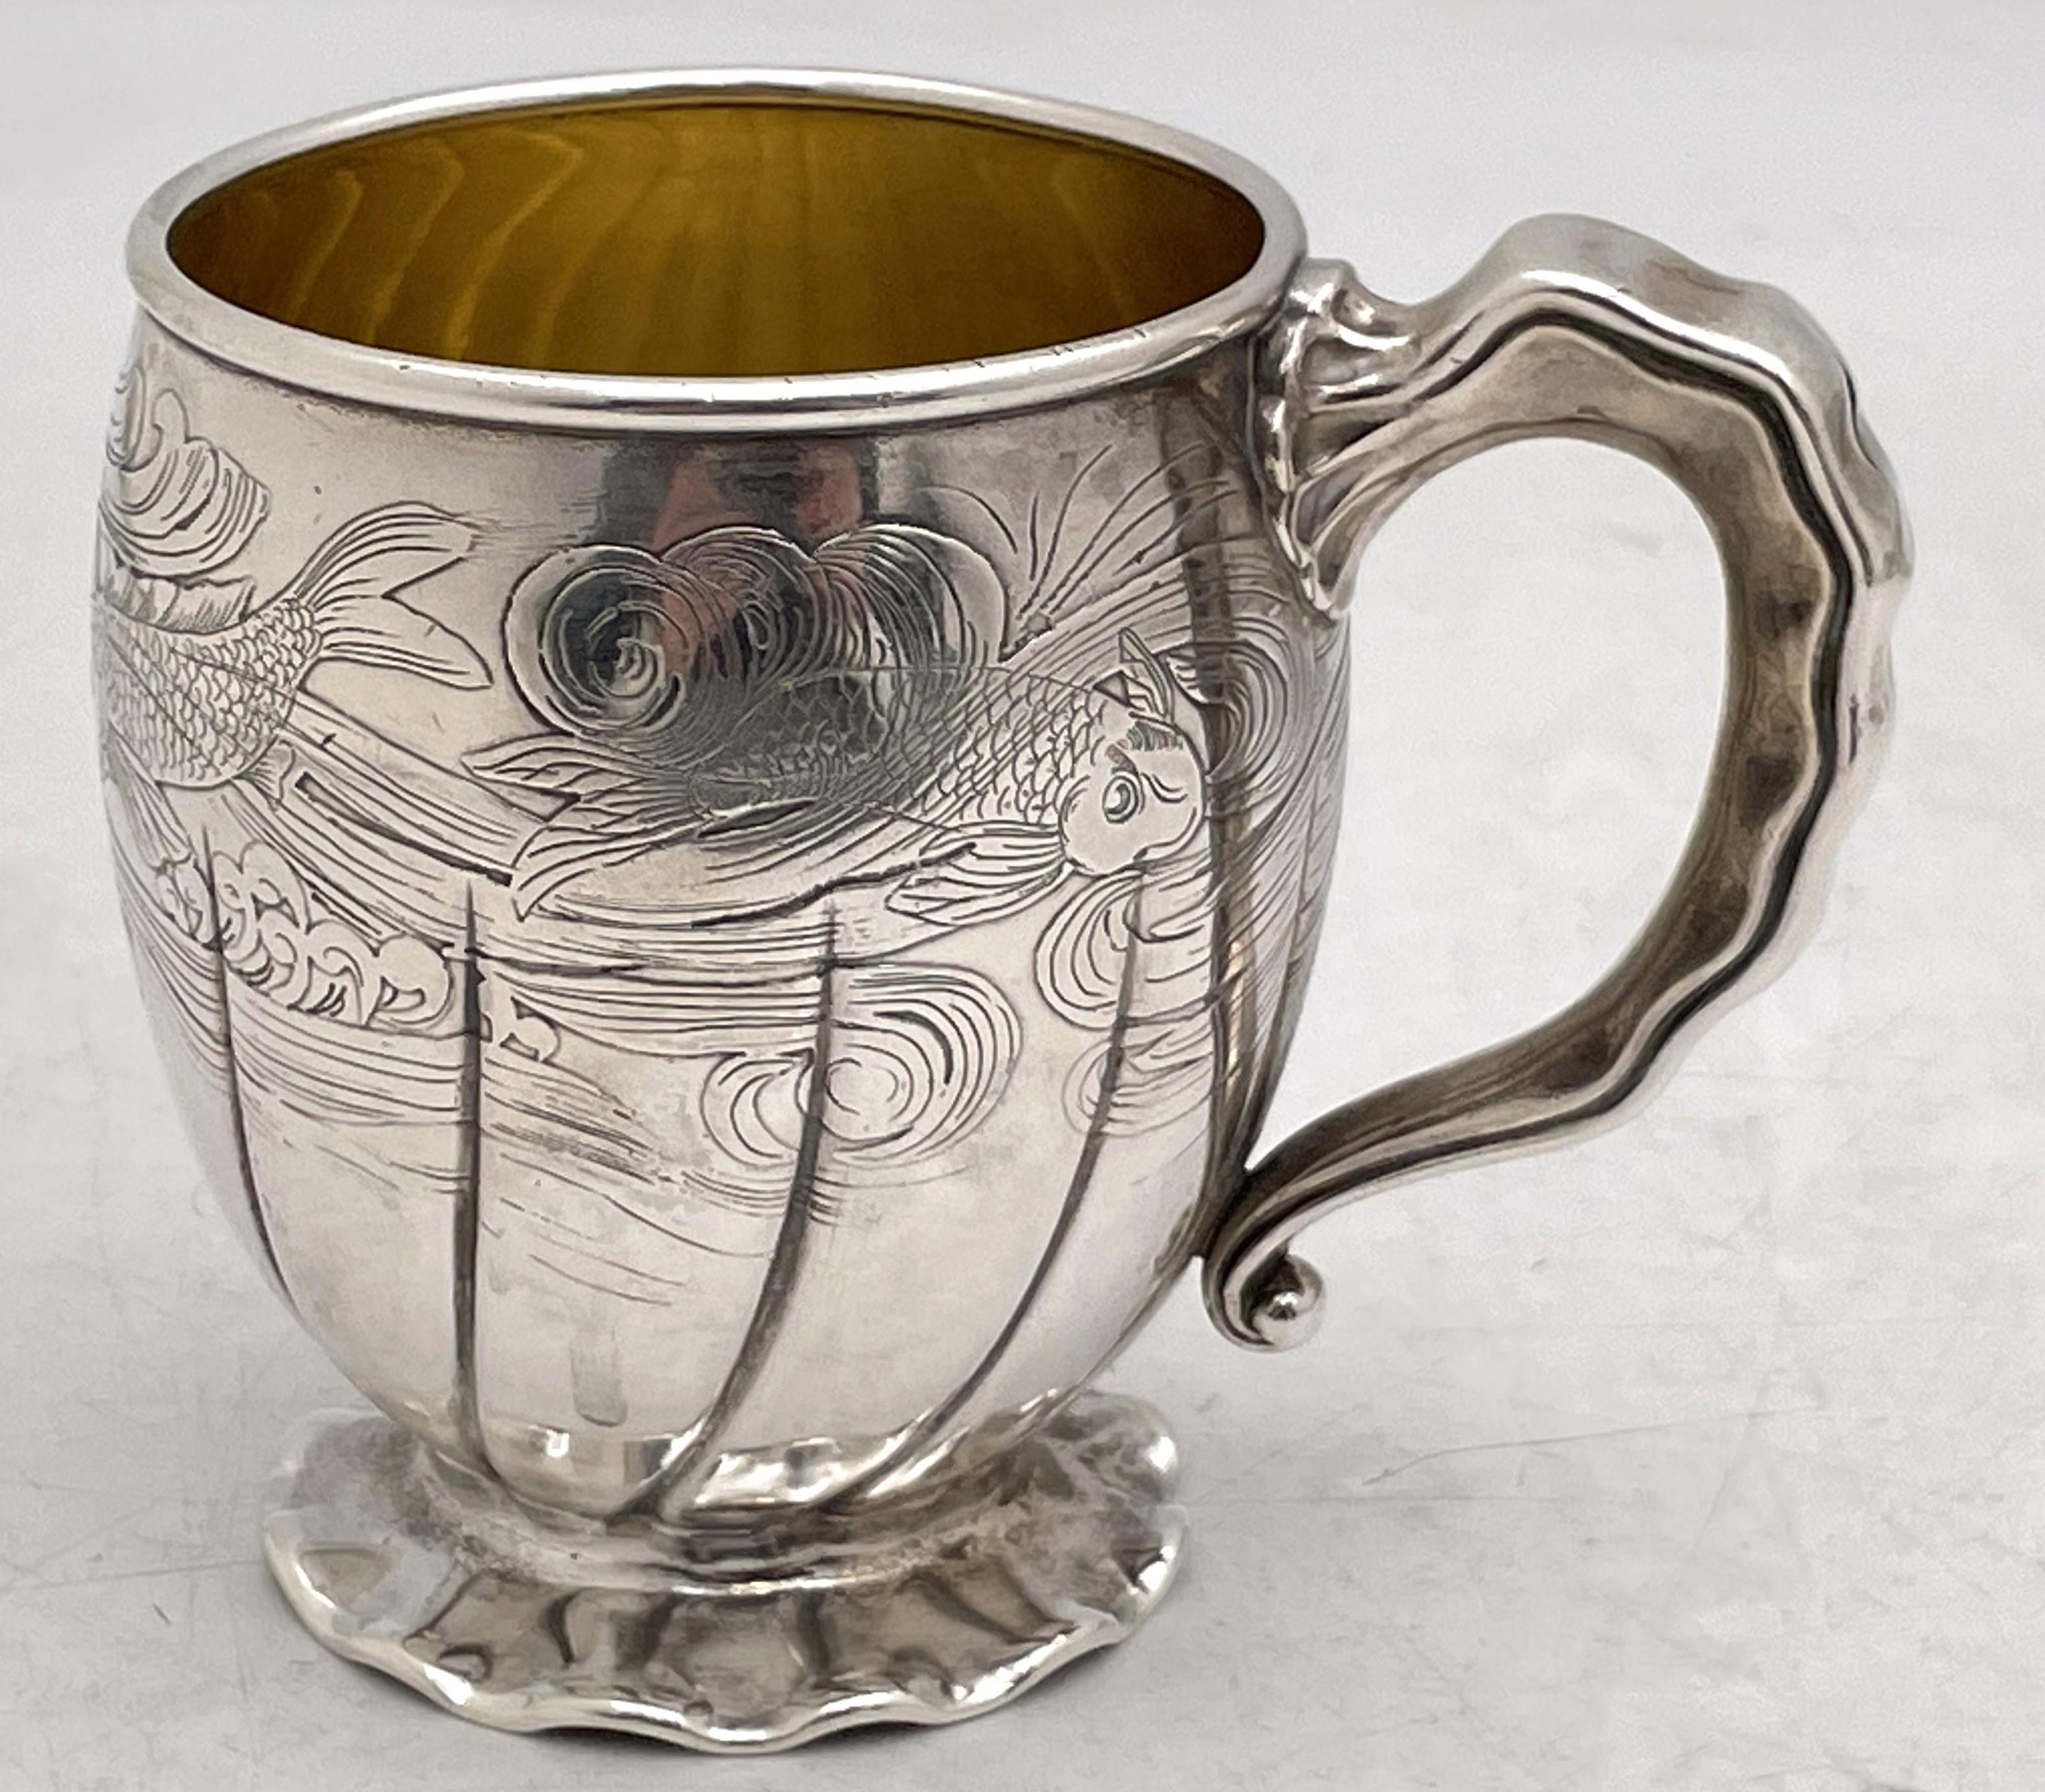 19th Century Gorham 1880 Sterling Silver Etched Child's Christening Mug with Aquatic Motifs For Sale